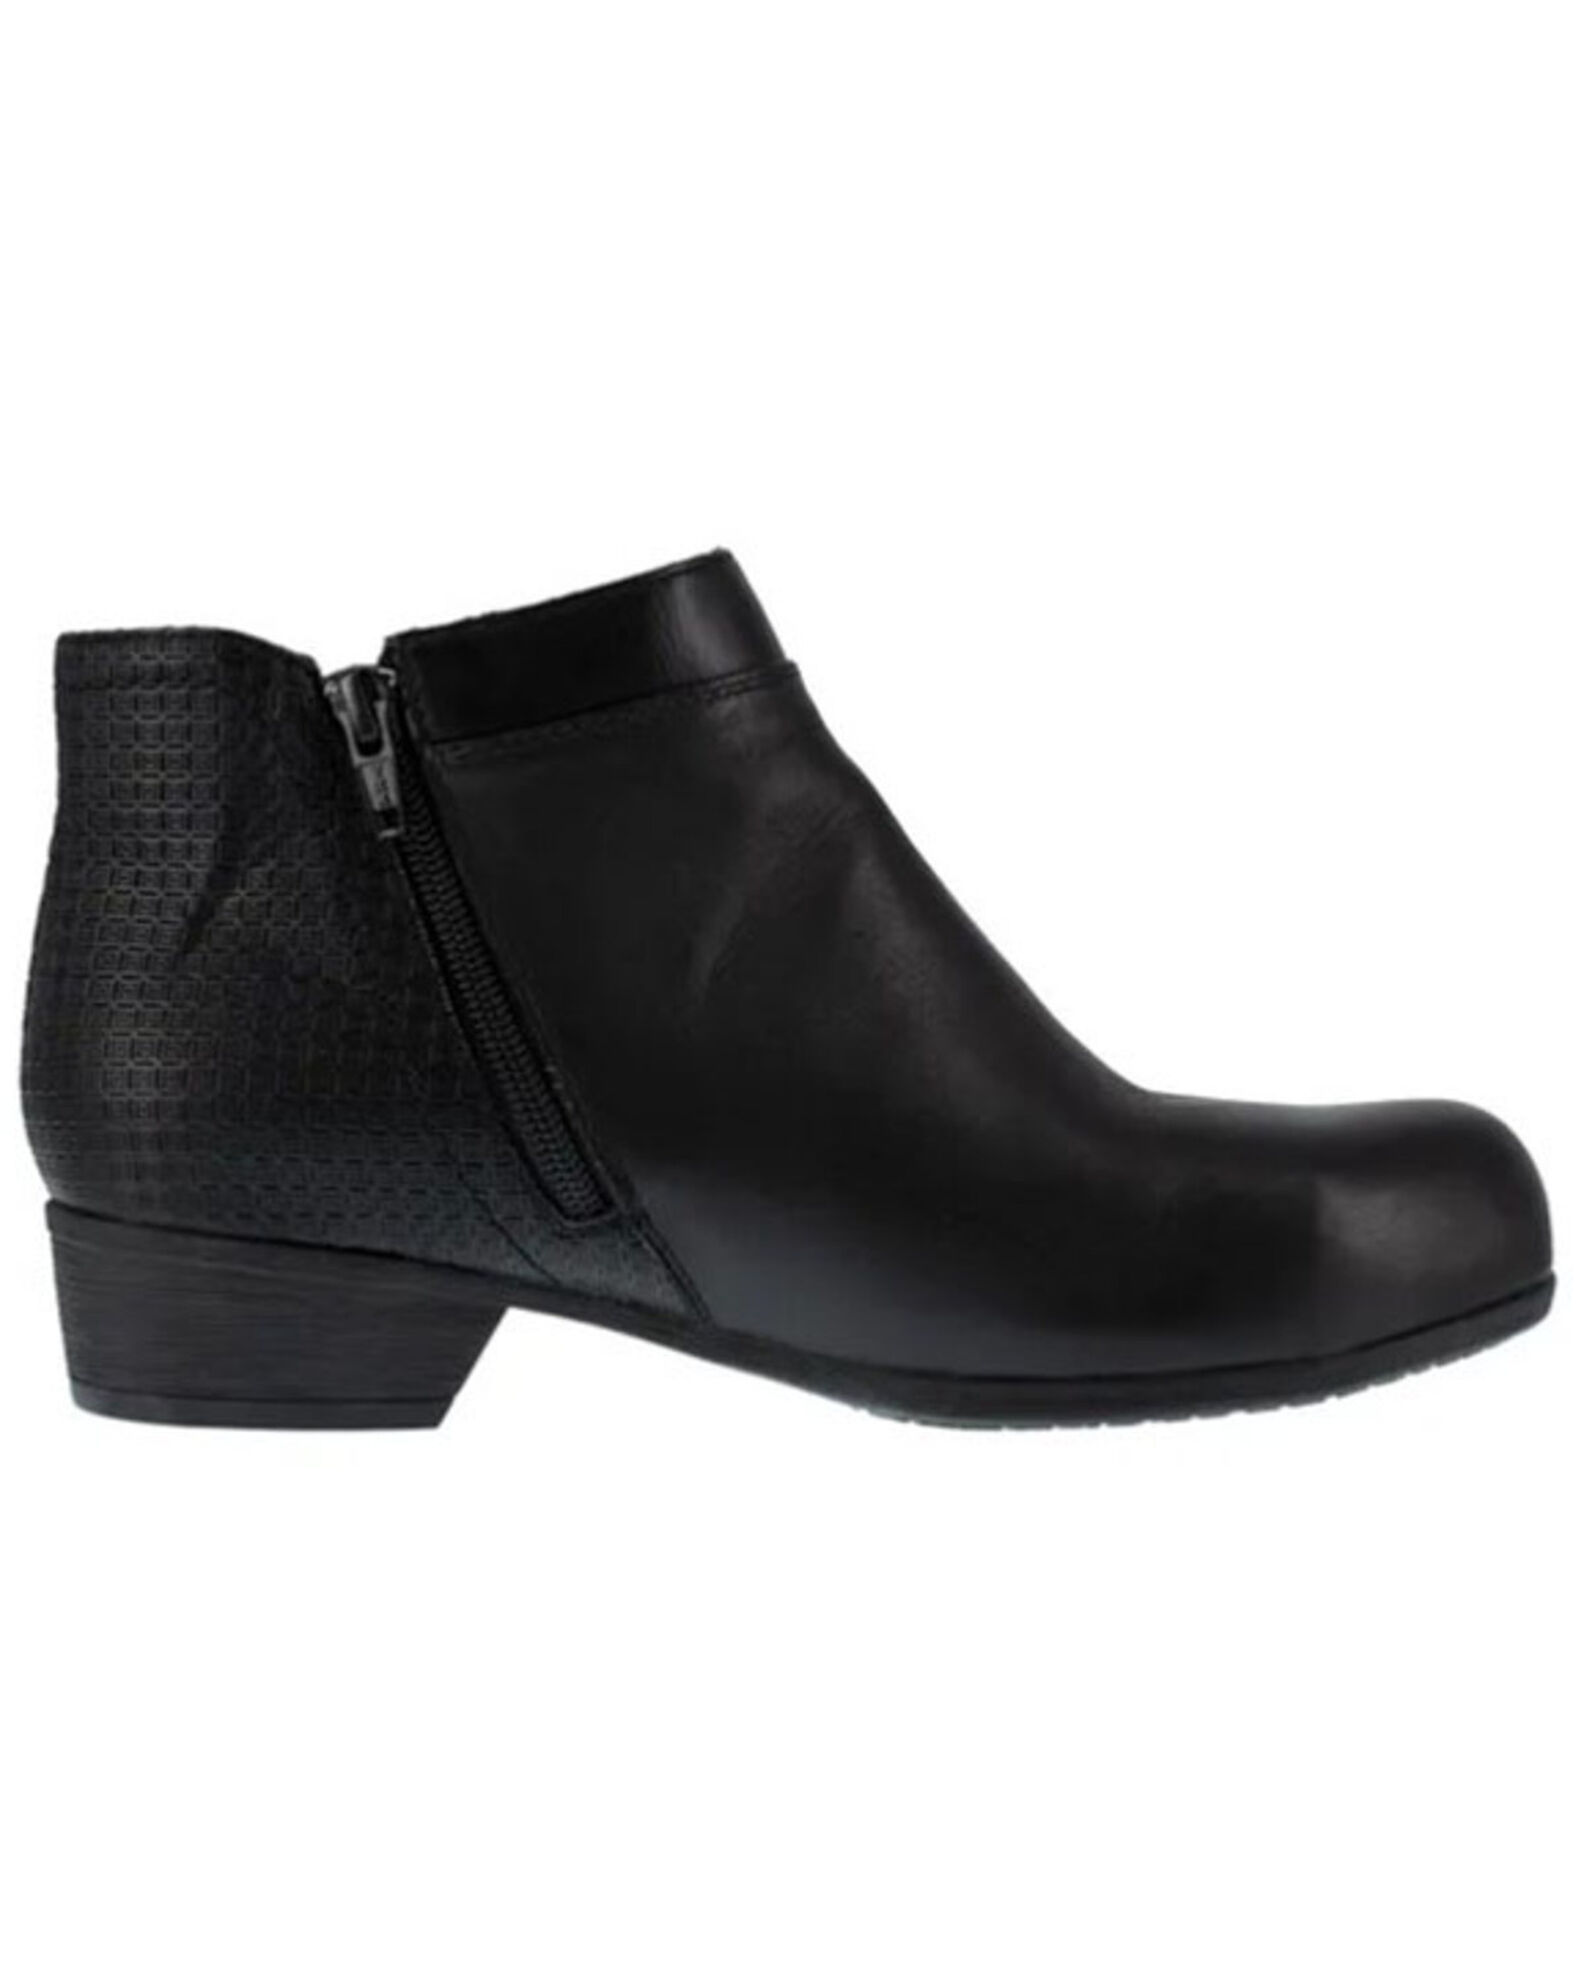 Rockport Women's Black Carly Work Booties - Alloy Toe | Boot Barn